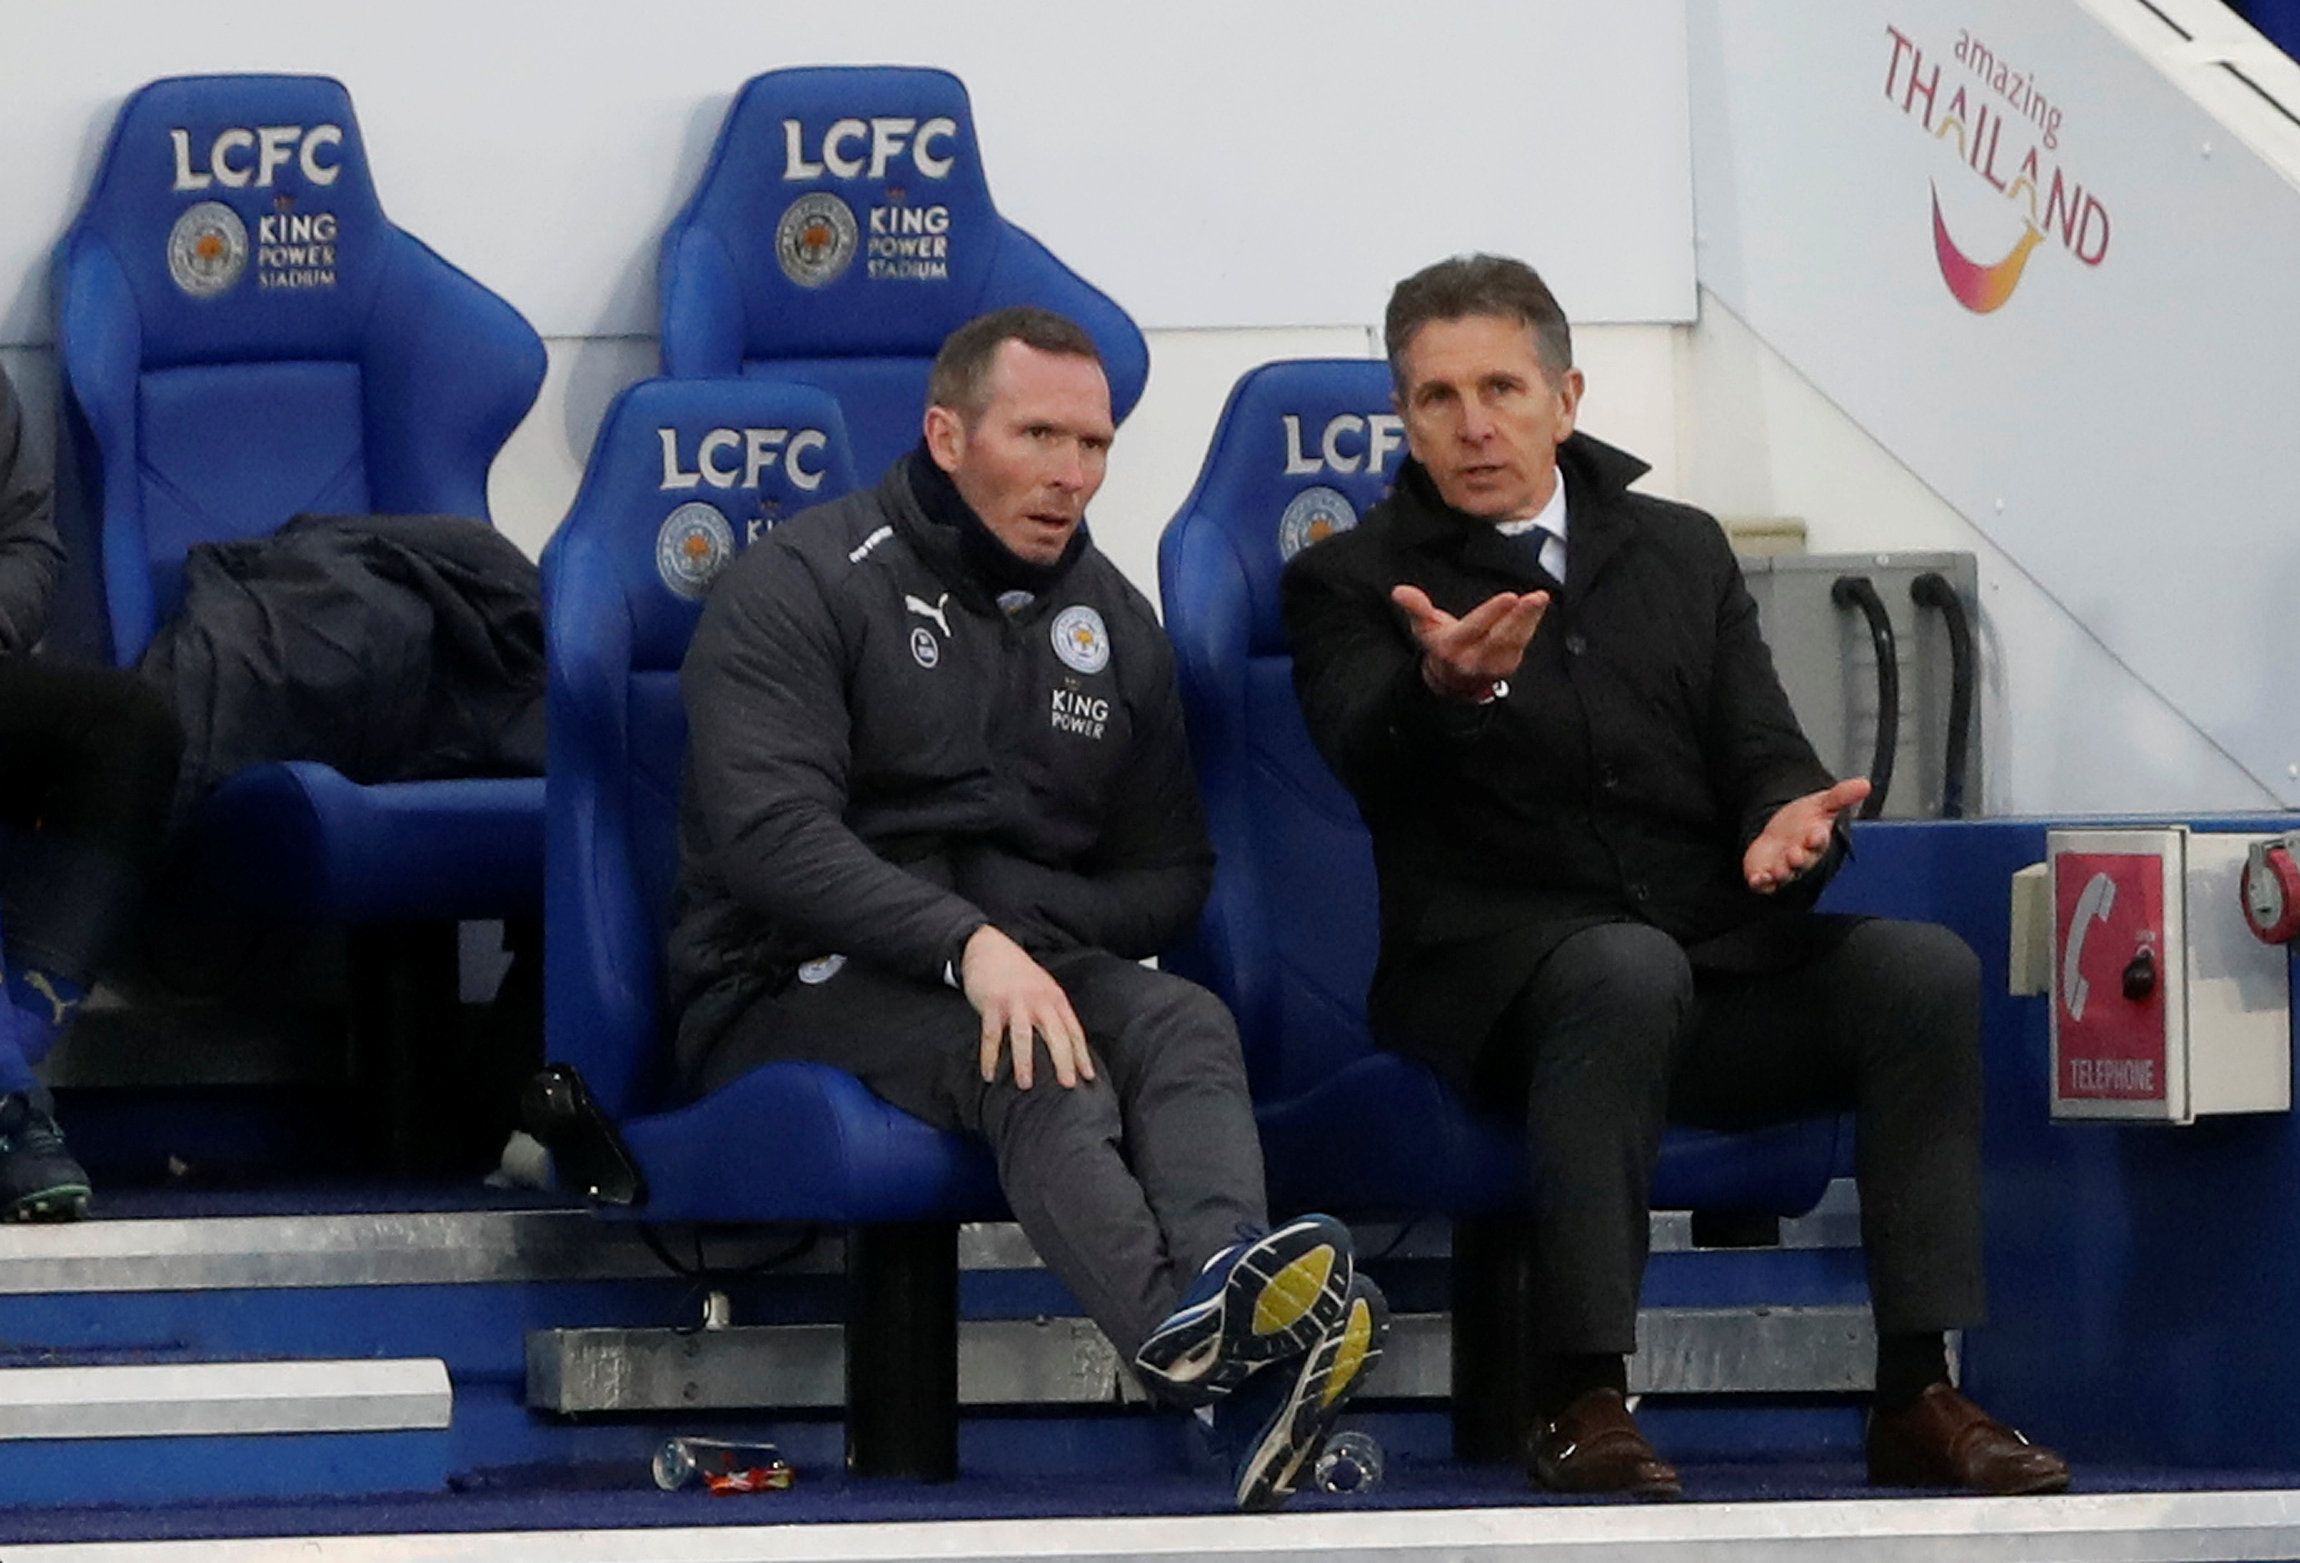 Soccer Football - Premier League - Leicester City vs Swansea City - King Power Stadium, Leicester, Britain - February 3, 2018   Leicester City manager Claude Puel talks to assistant manager Michael Appleton   Action Images via Reuters/Carl Recine    EDITORIAL USE ONLY. No use with unauthorized audio, video, data, fixture lists, club/league logos or "live" services. Online in-match use limited to 75 images, no video emulation. No use in betting, games or single club/league/player publications.  P